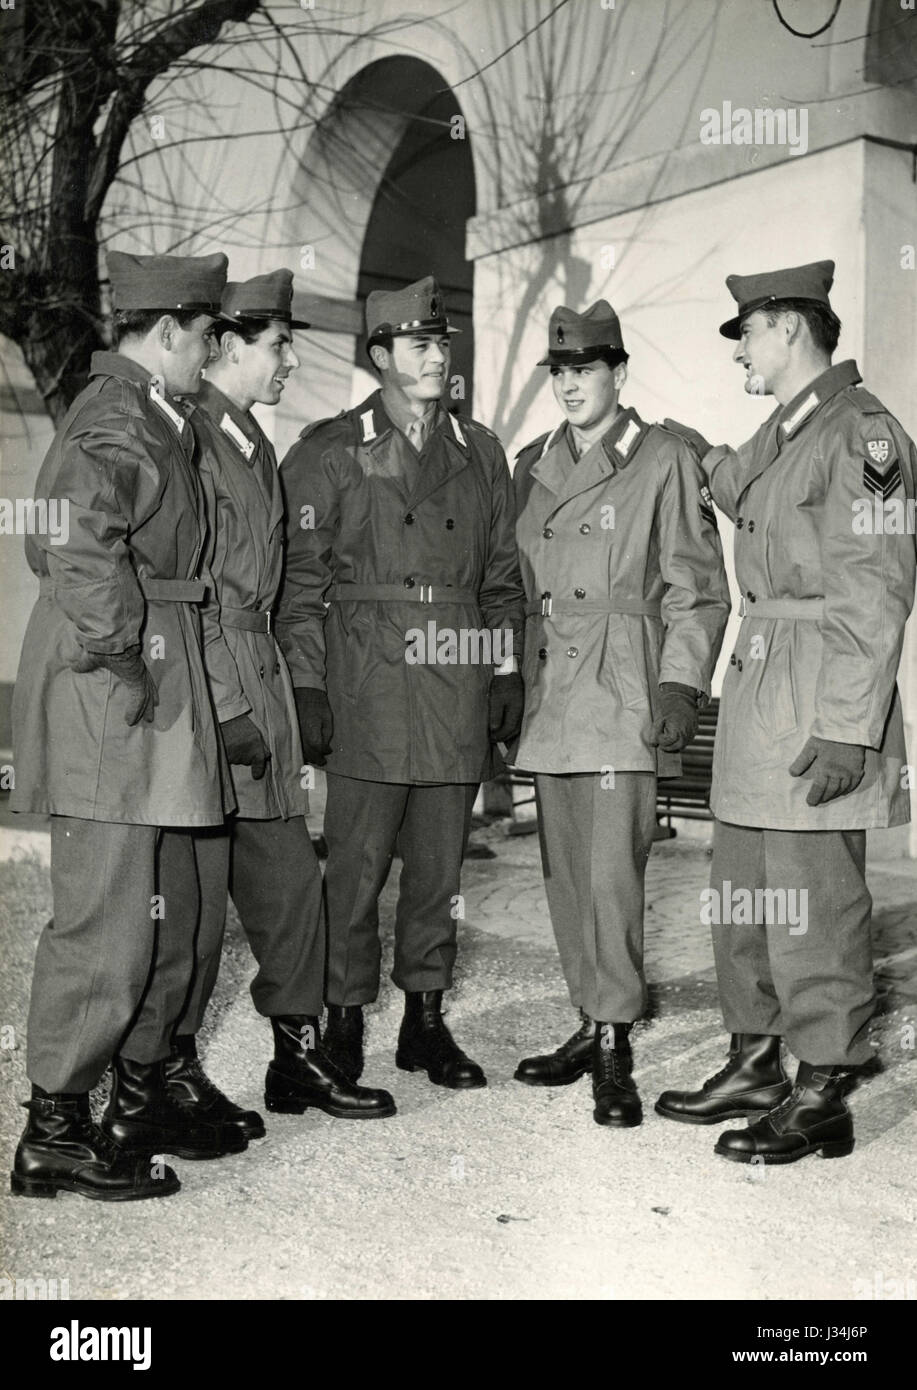 New uniforms for the Italian Republican Army, Italy 1957 Stock Photo